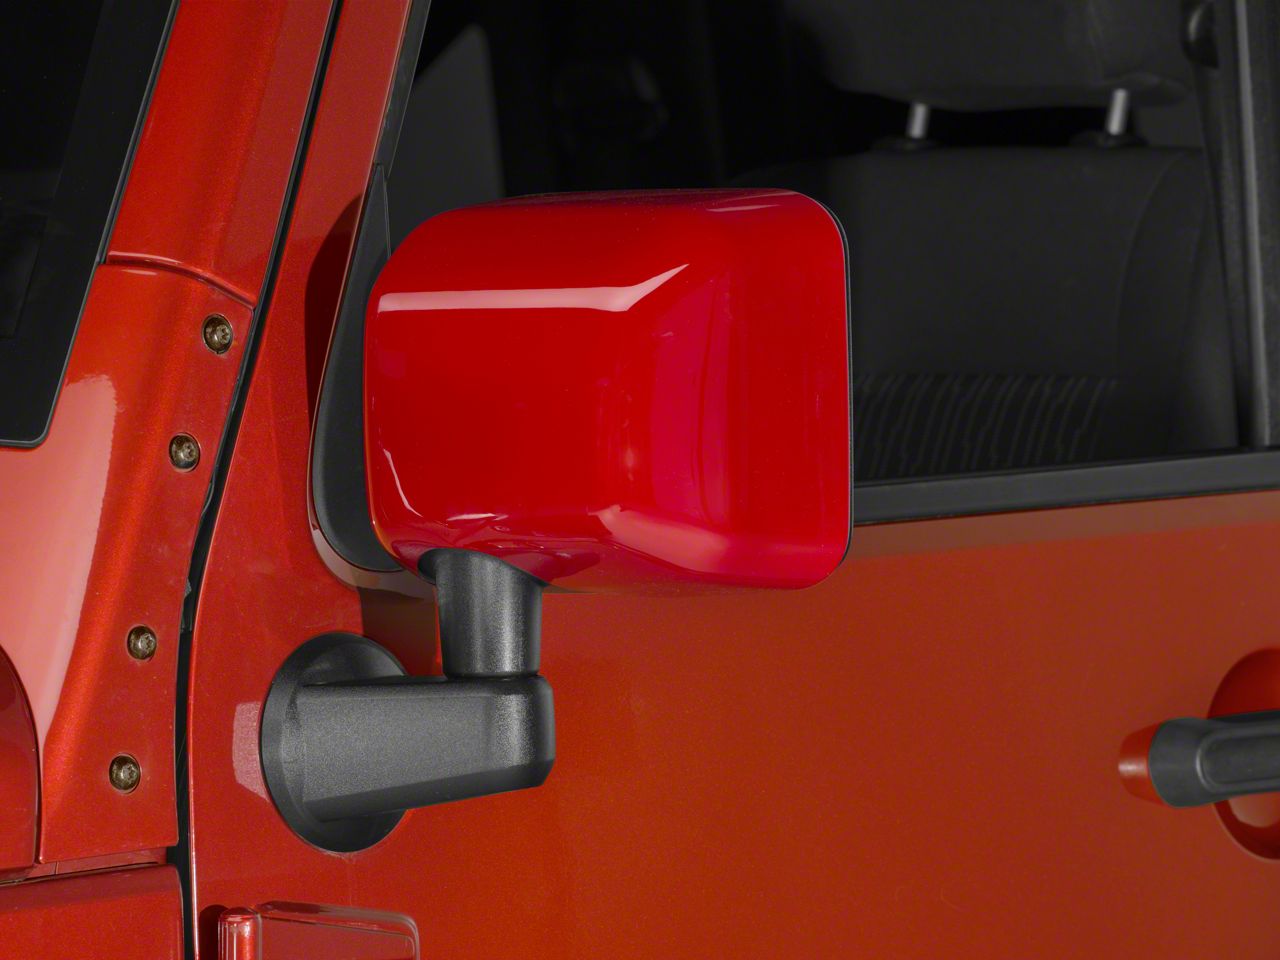 Painted-to-Match 1 Pair Boomerang for Jeep JK Wrangler ColorPro Mirror Caps - Flame Red 2007-2018 - Driver & Passenger Side Mirrors 